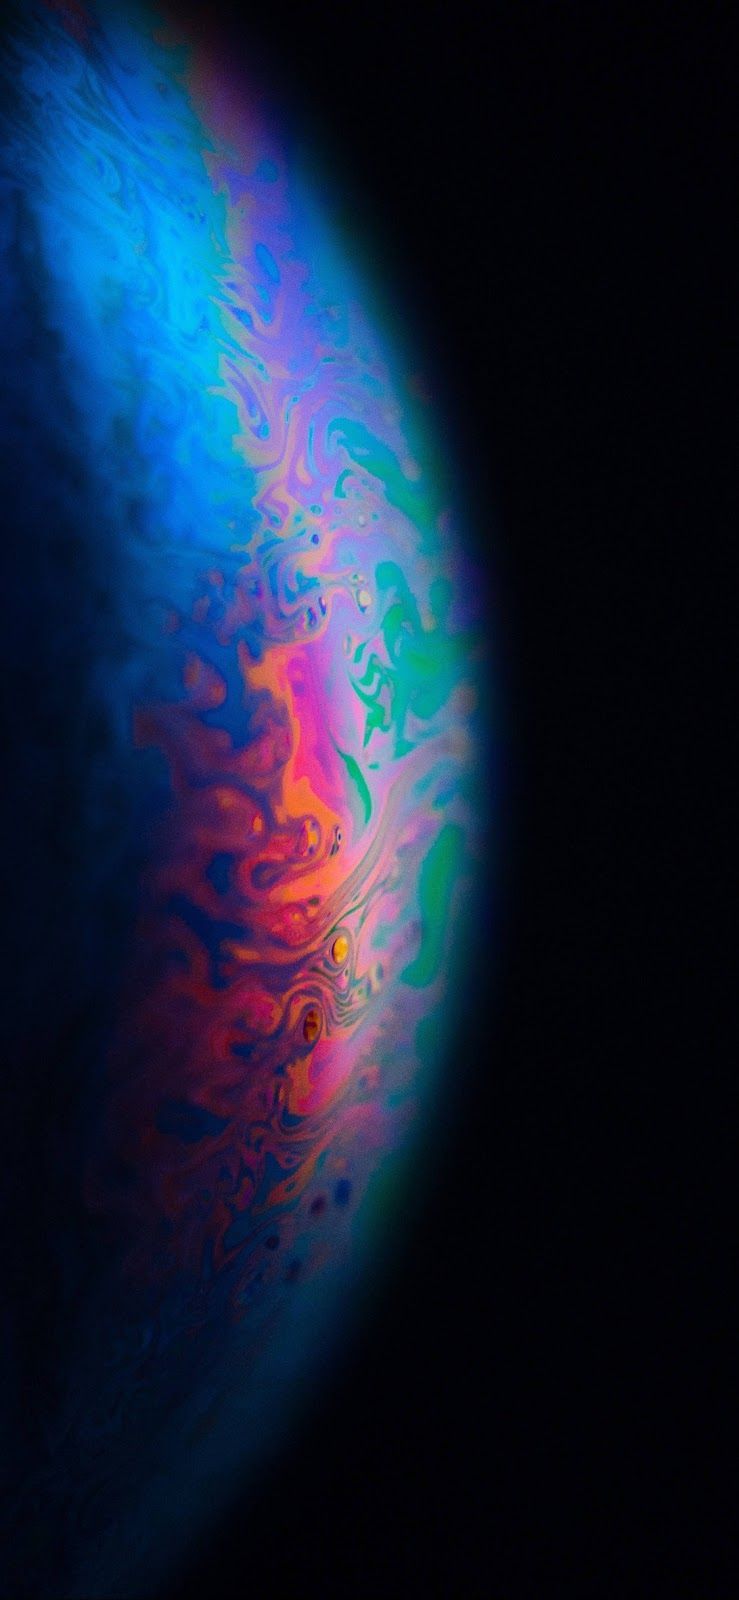 Colorful Bubble (iPhone X). Apple wallpaper iphone, iPhone